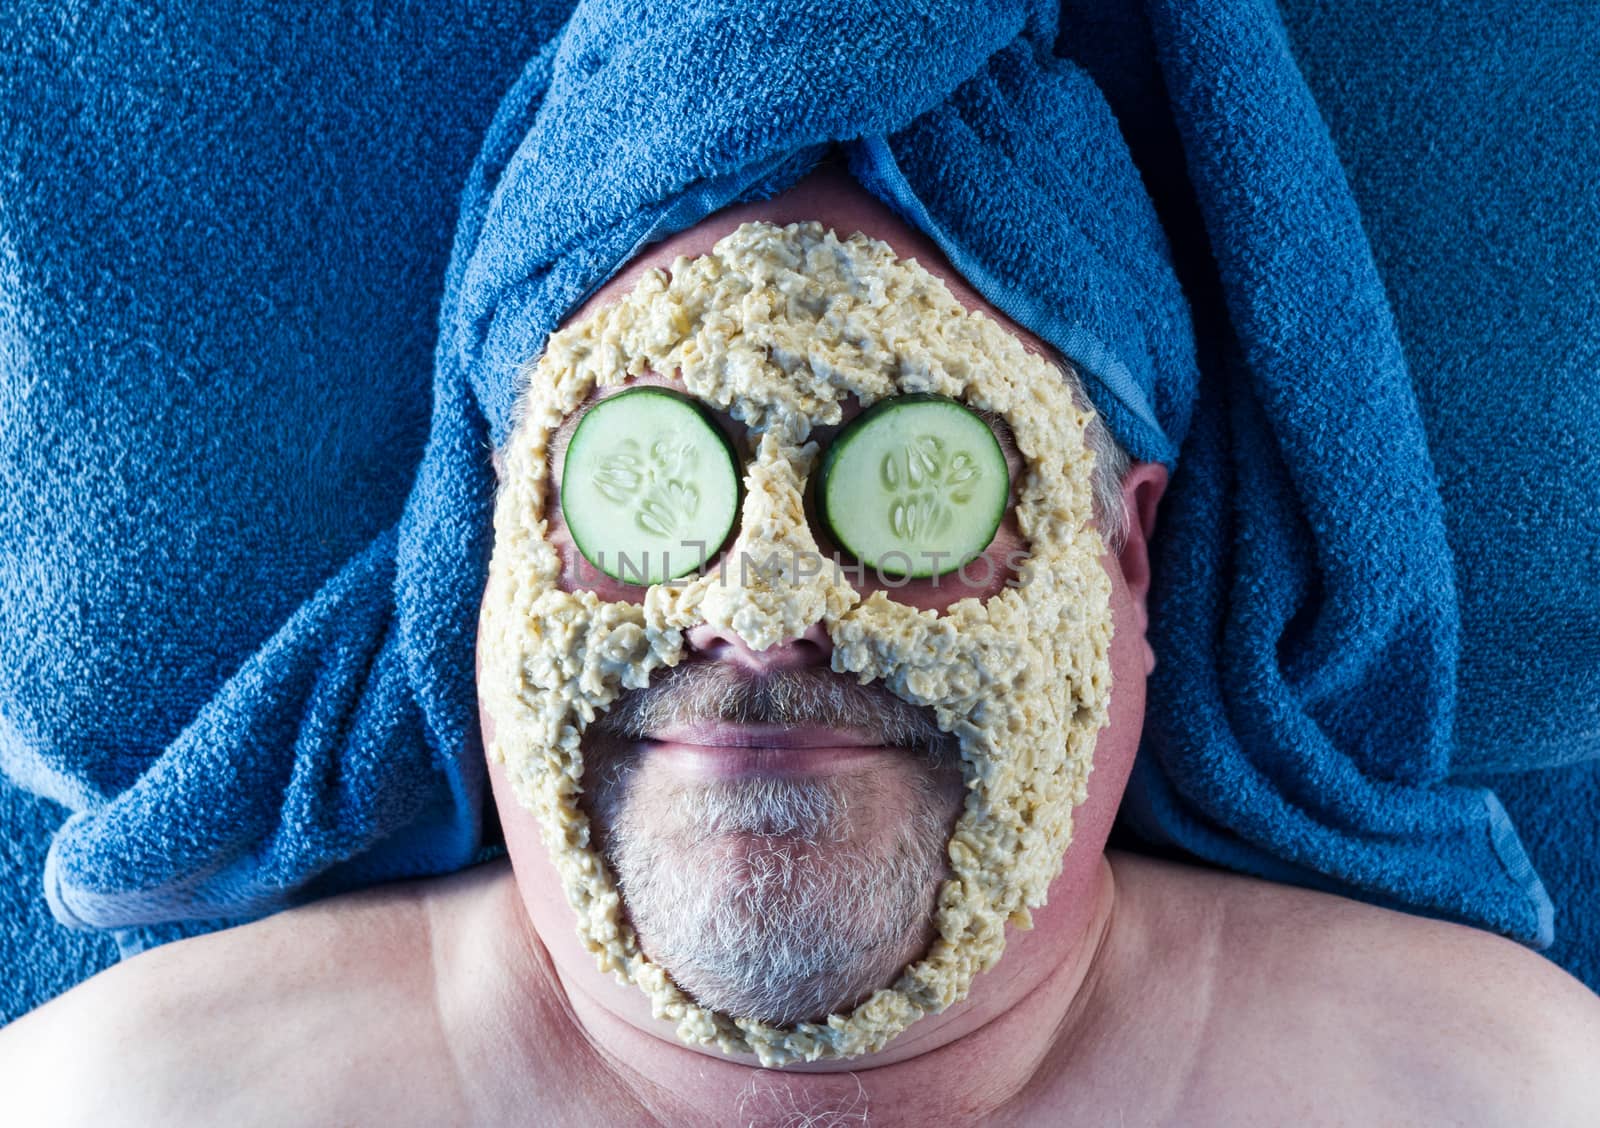 Man Facial by krisblackphotography